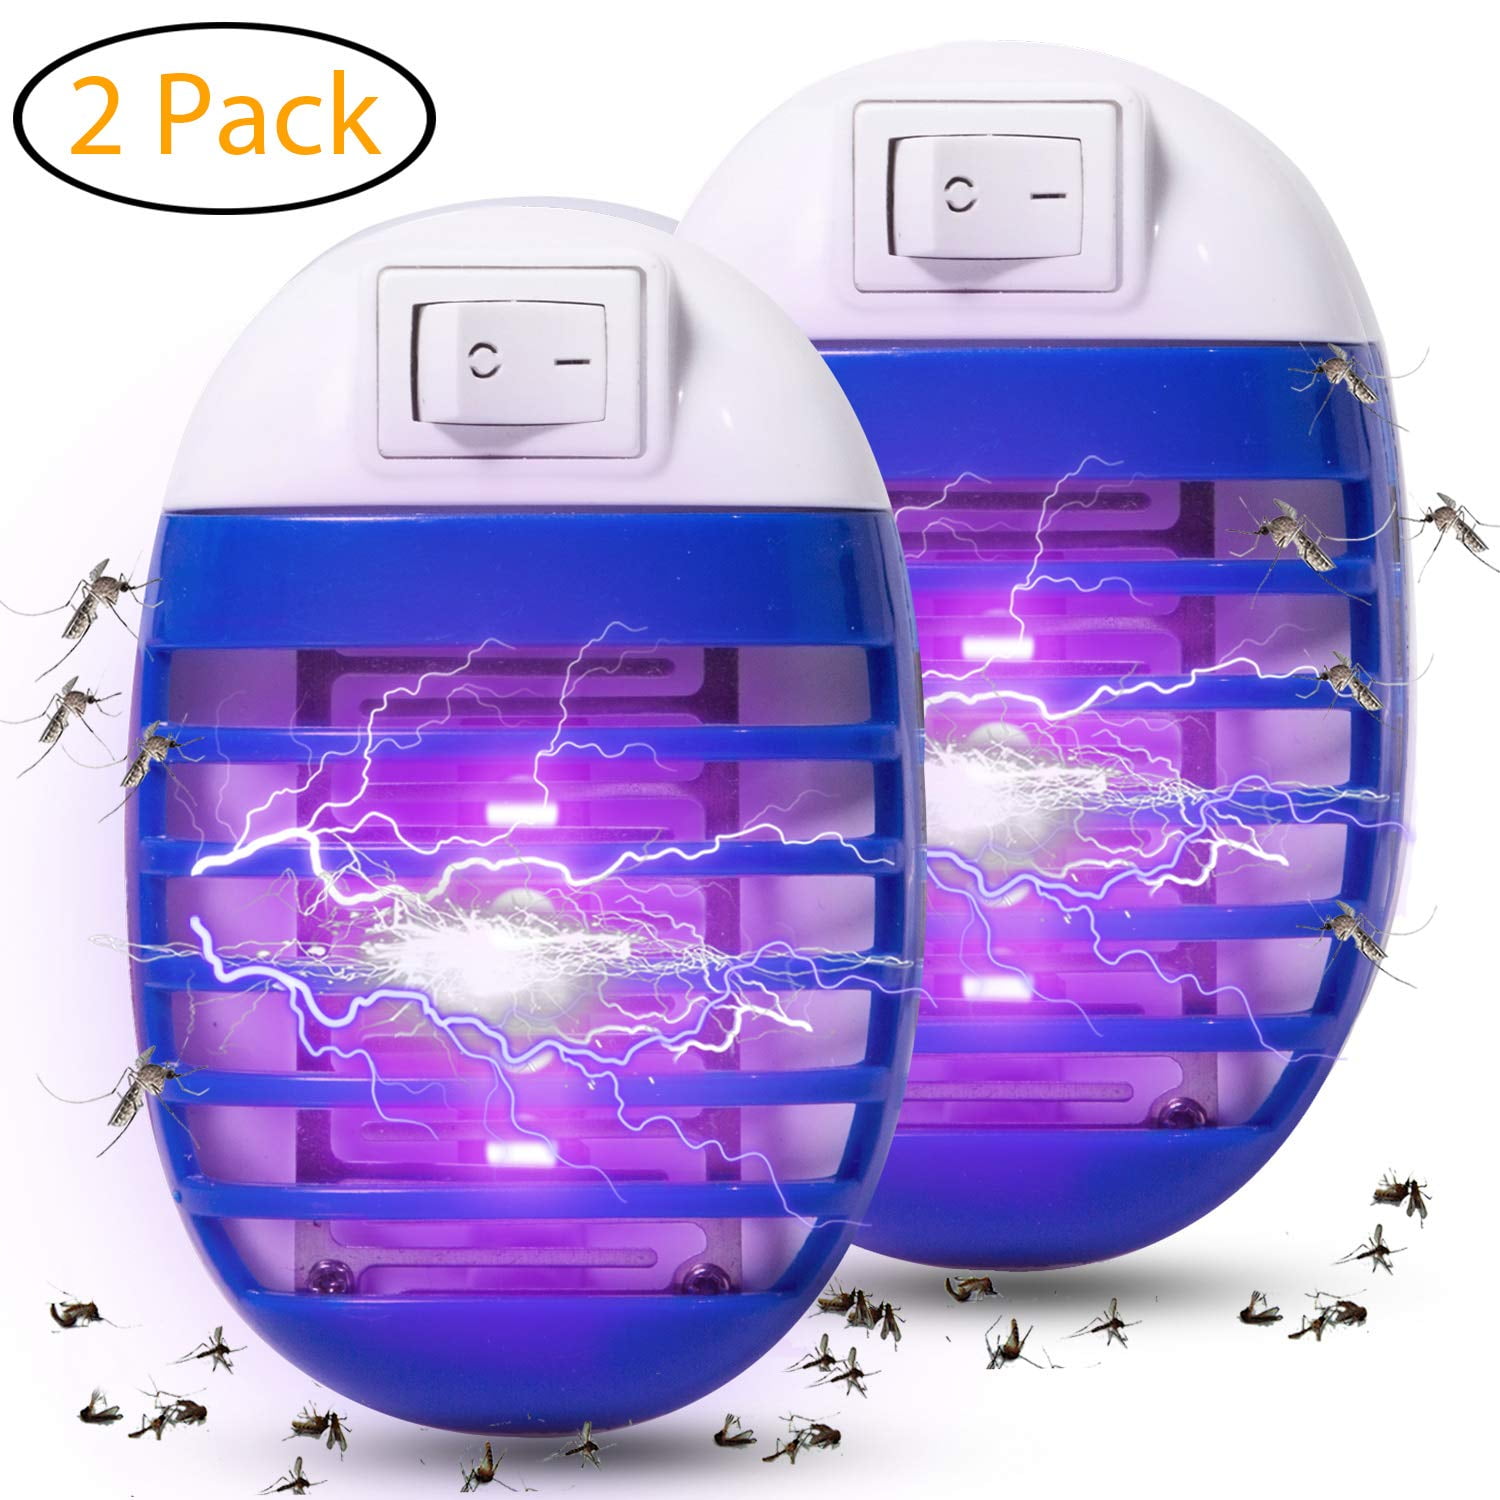 2X Electric Mosquito Insect Killer Zapper LED Light Fly Bug Trap Pest Control US 